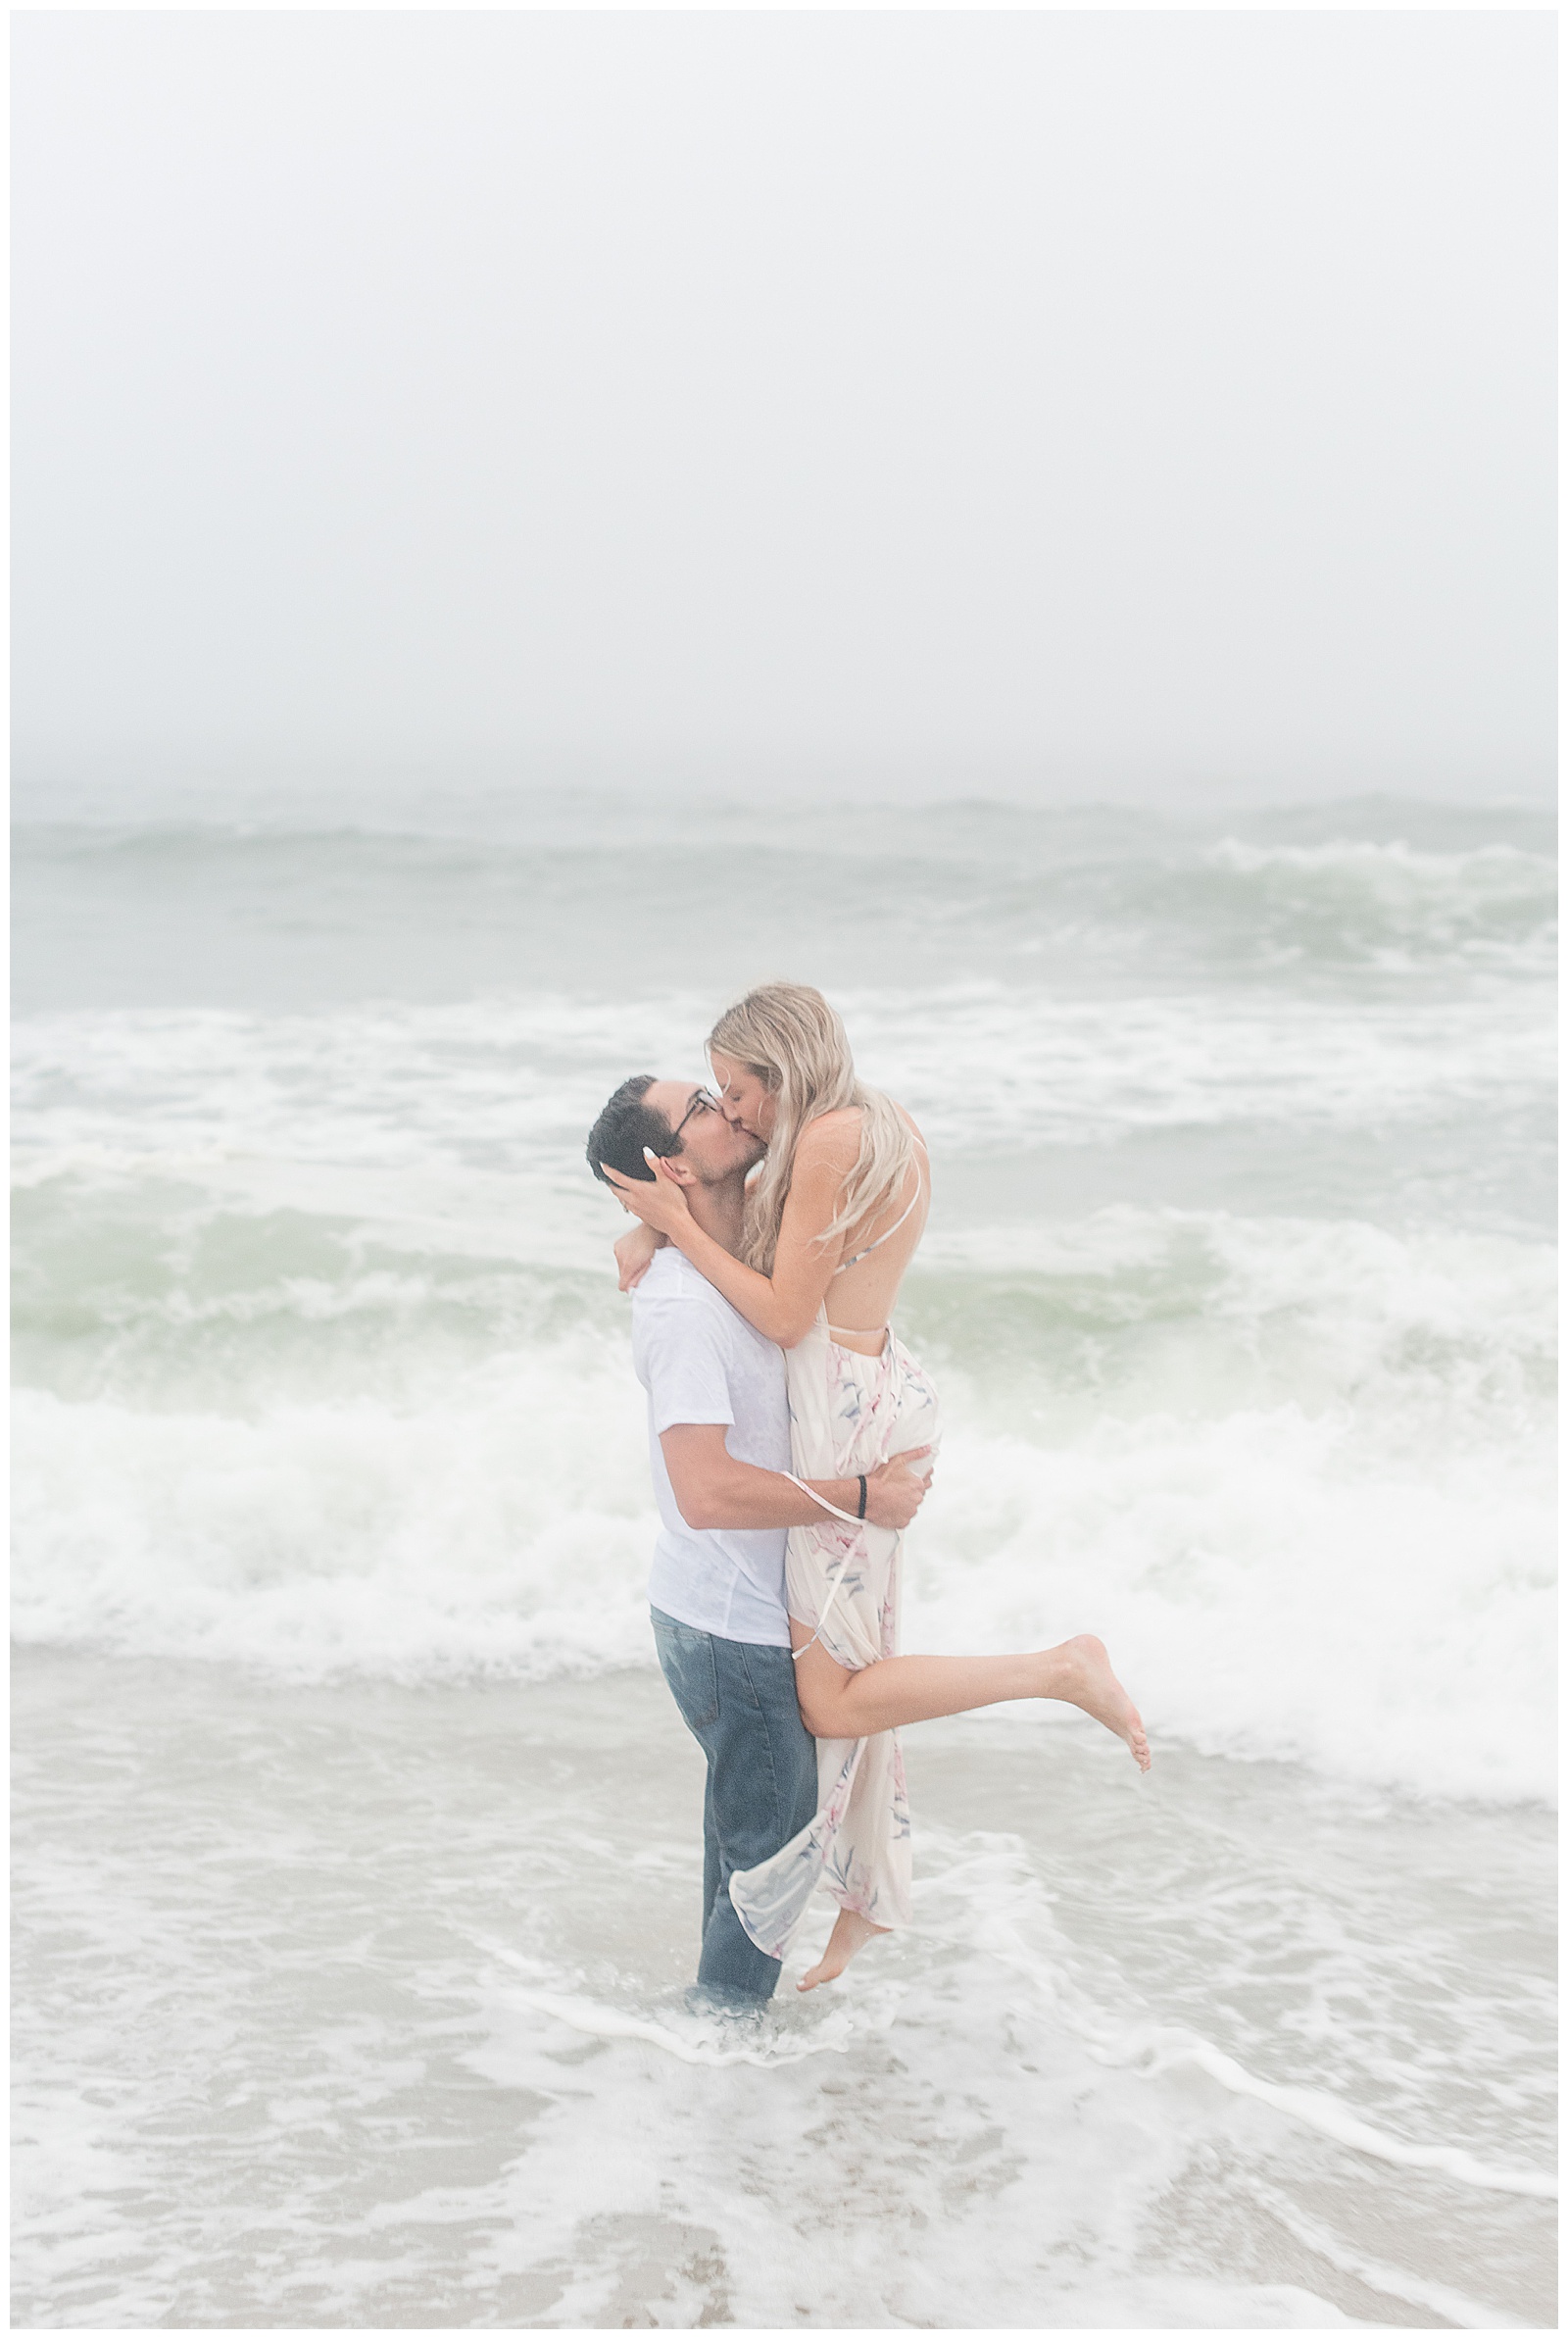 guy in jeans and white t-shirt stands in ocean holding and kissing girl in floral dress